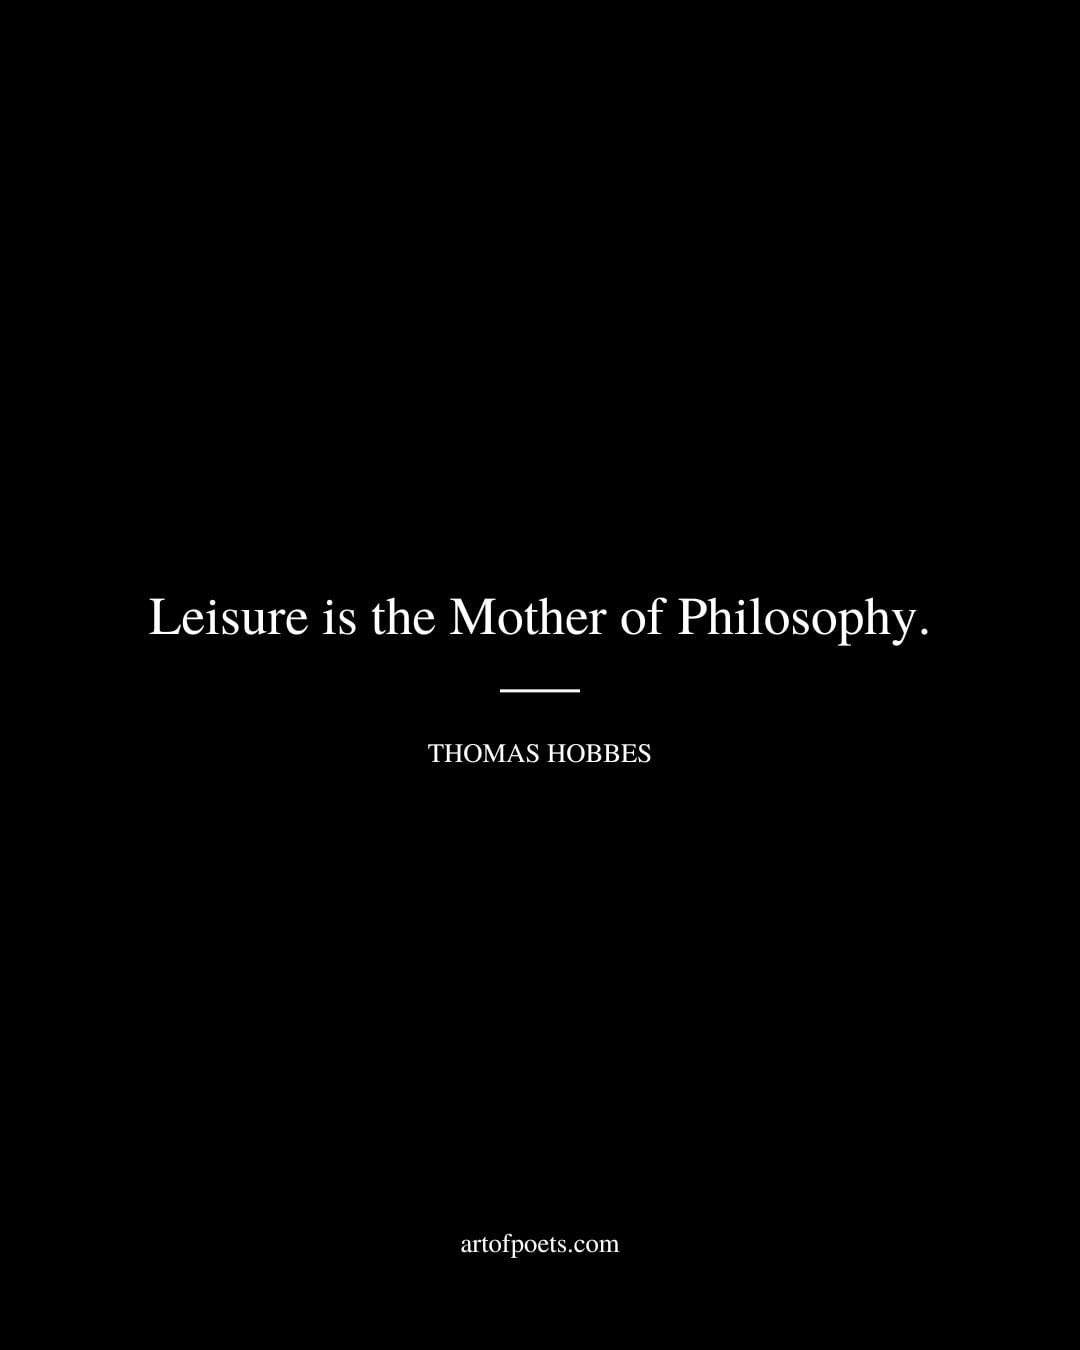 Leisure is the Mother of Philosophy